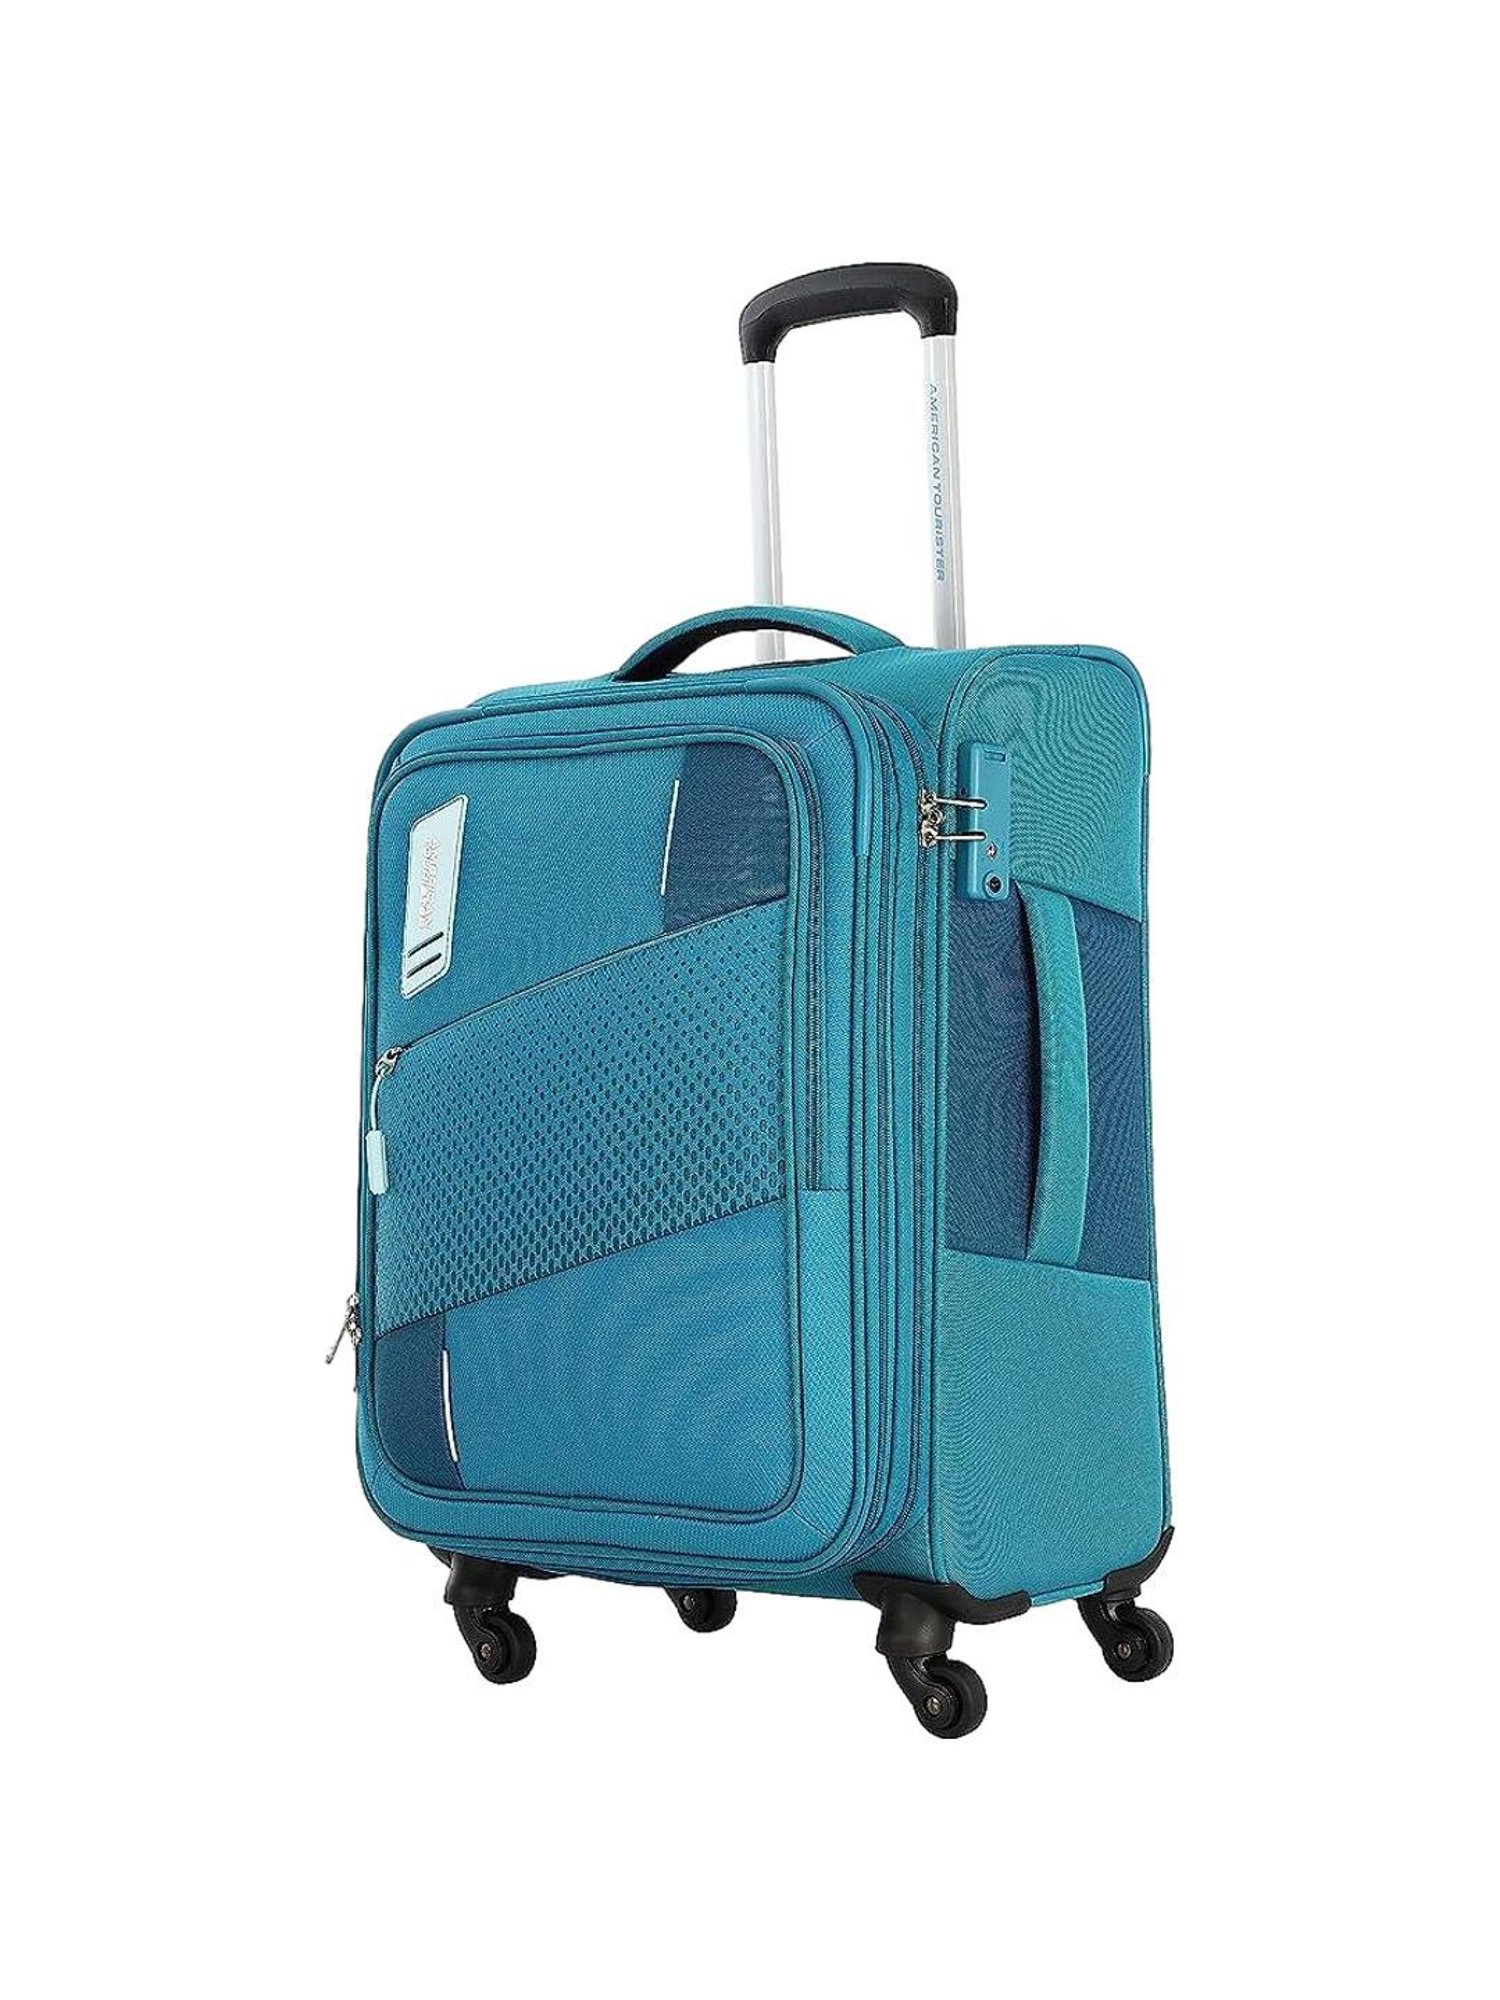 American Tourister Polypropylene Multi-Color Small 55 Cm Cabin Size  Speedwheel Hardside Shell Strolly / Luggage Trolley Bag, 14 Centimeters, 6  Centimeters, Multi-Coloured : Amazon.in: Fashion